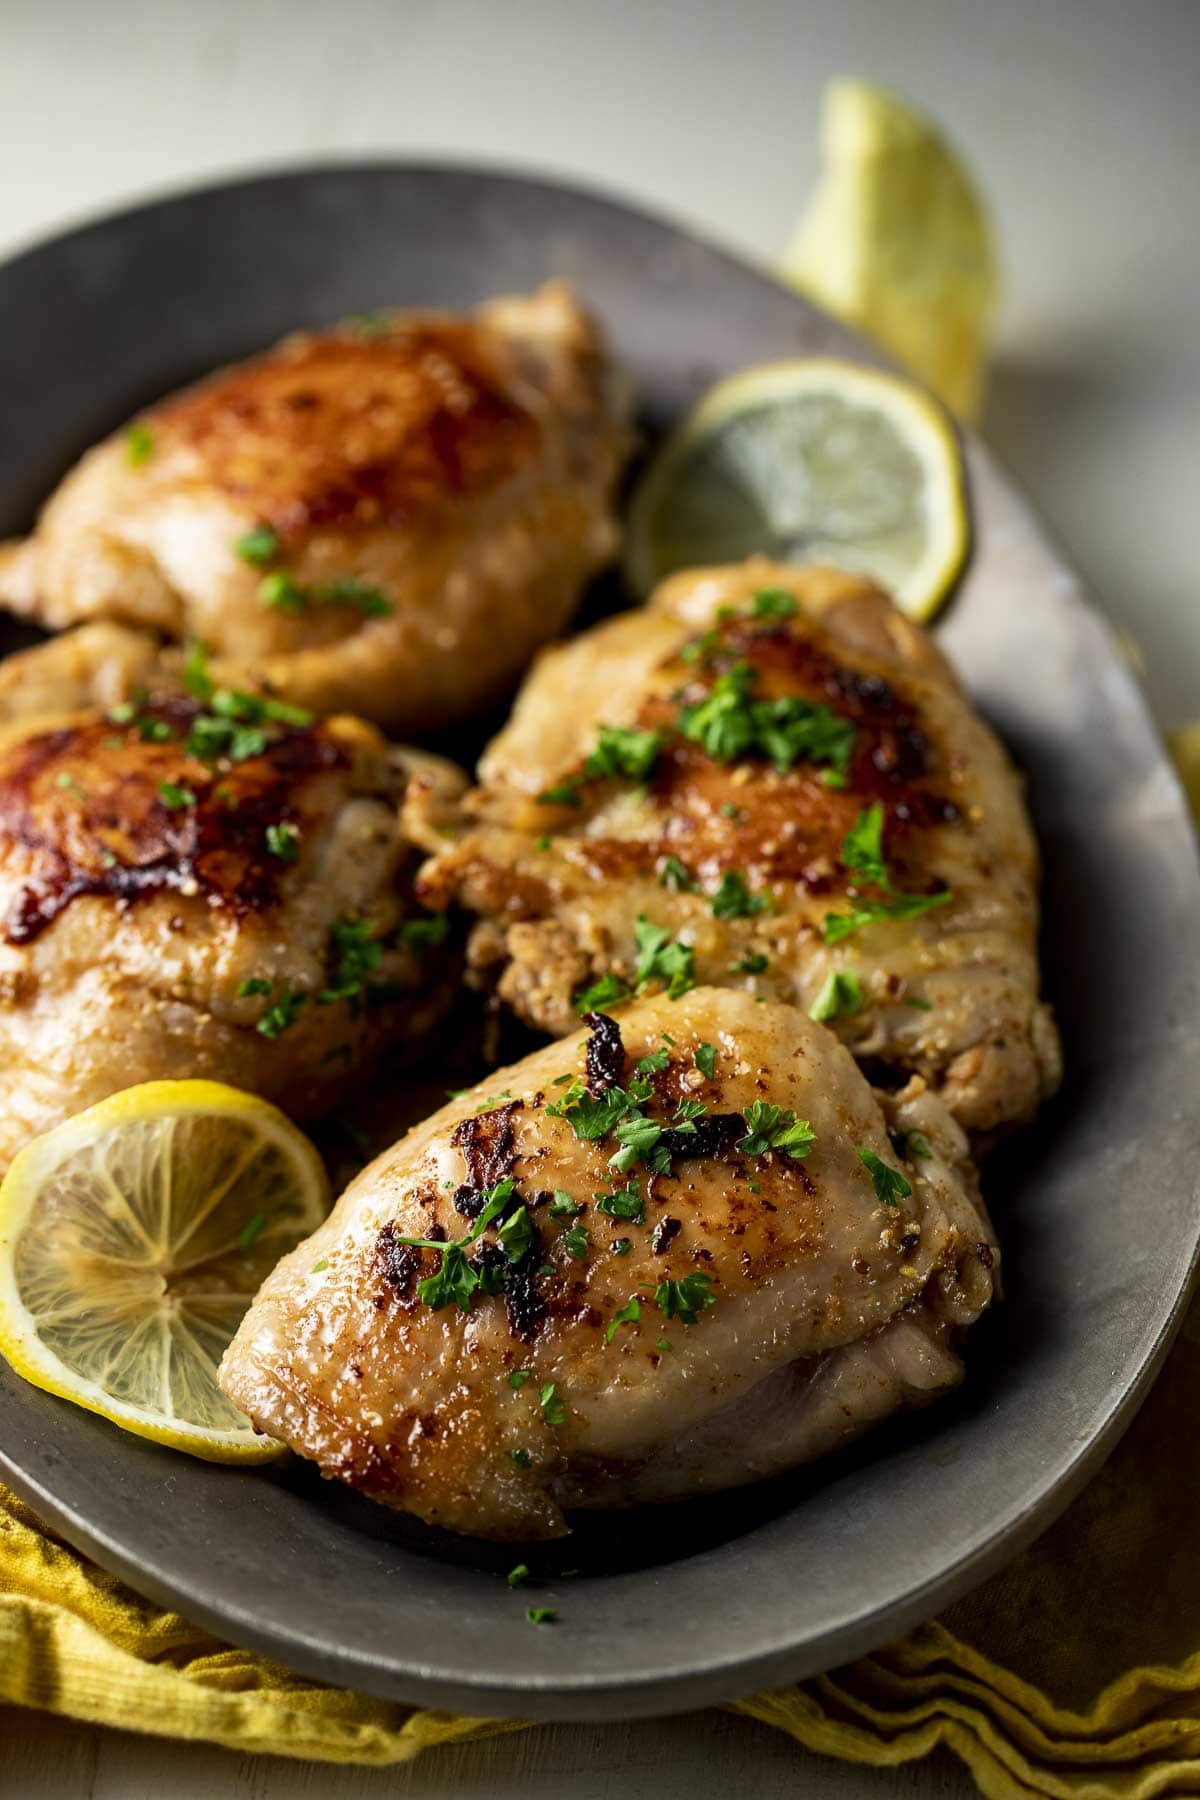 Sous vide chicken thighs served with chopped herbs and lemon slices.